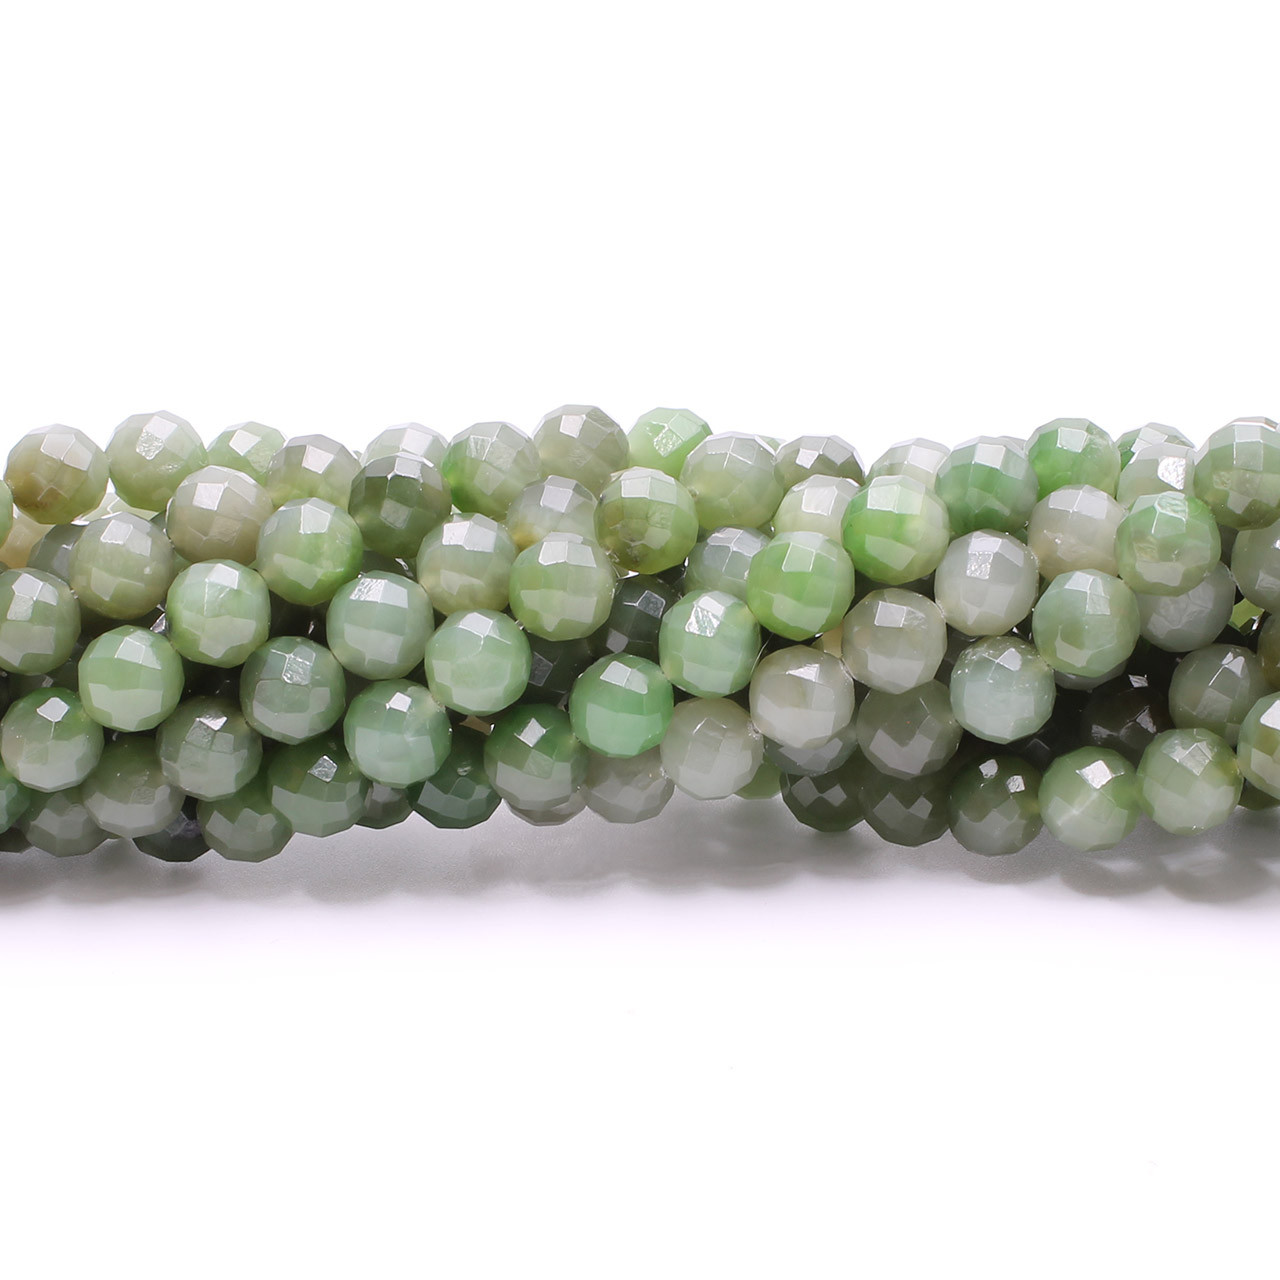 Natural AAA Jade Beads,10mm Smooth Taiwan Jade Beads For Jewelry  Making,Round Jade Bead Necklace,Gift For Women, 15 Inch Strand Bead (V)